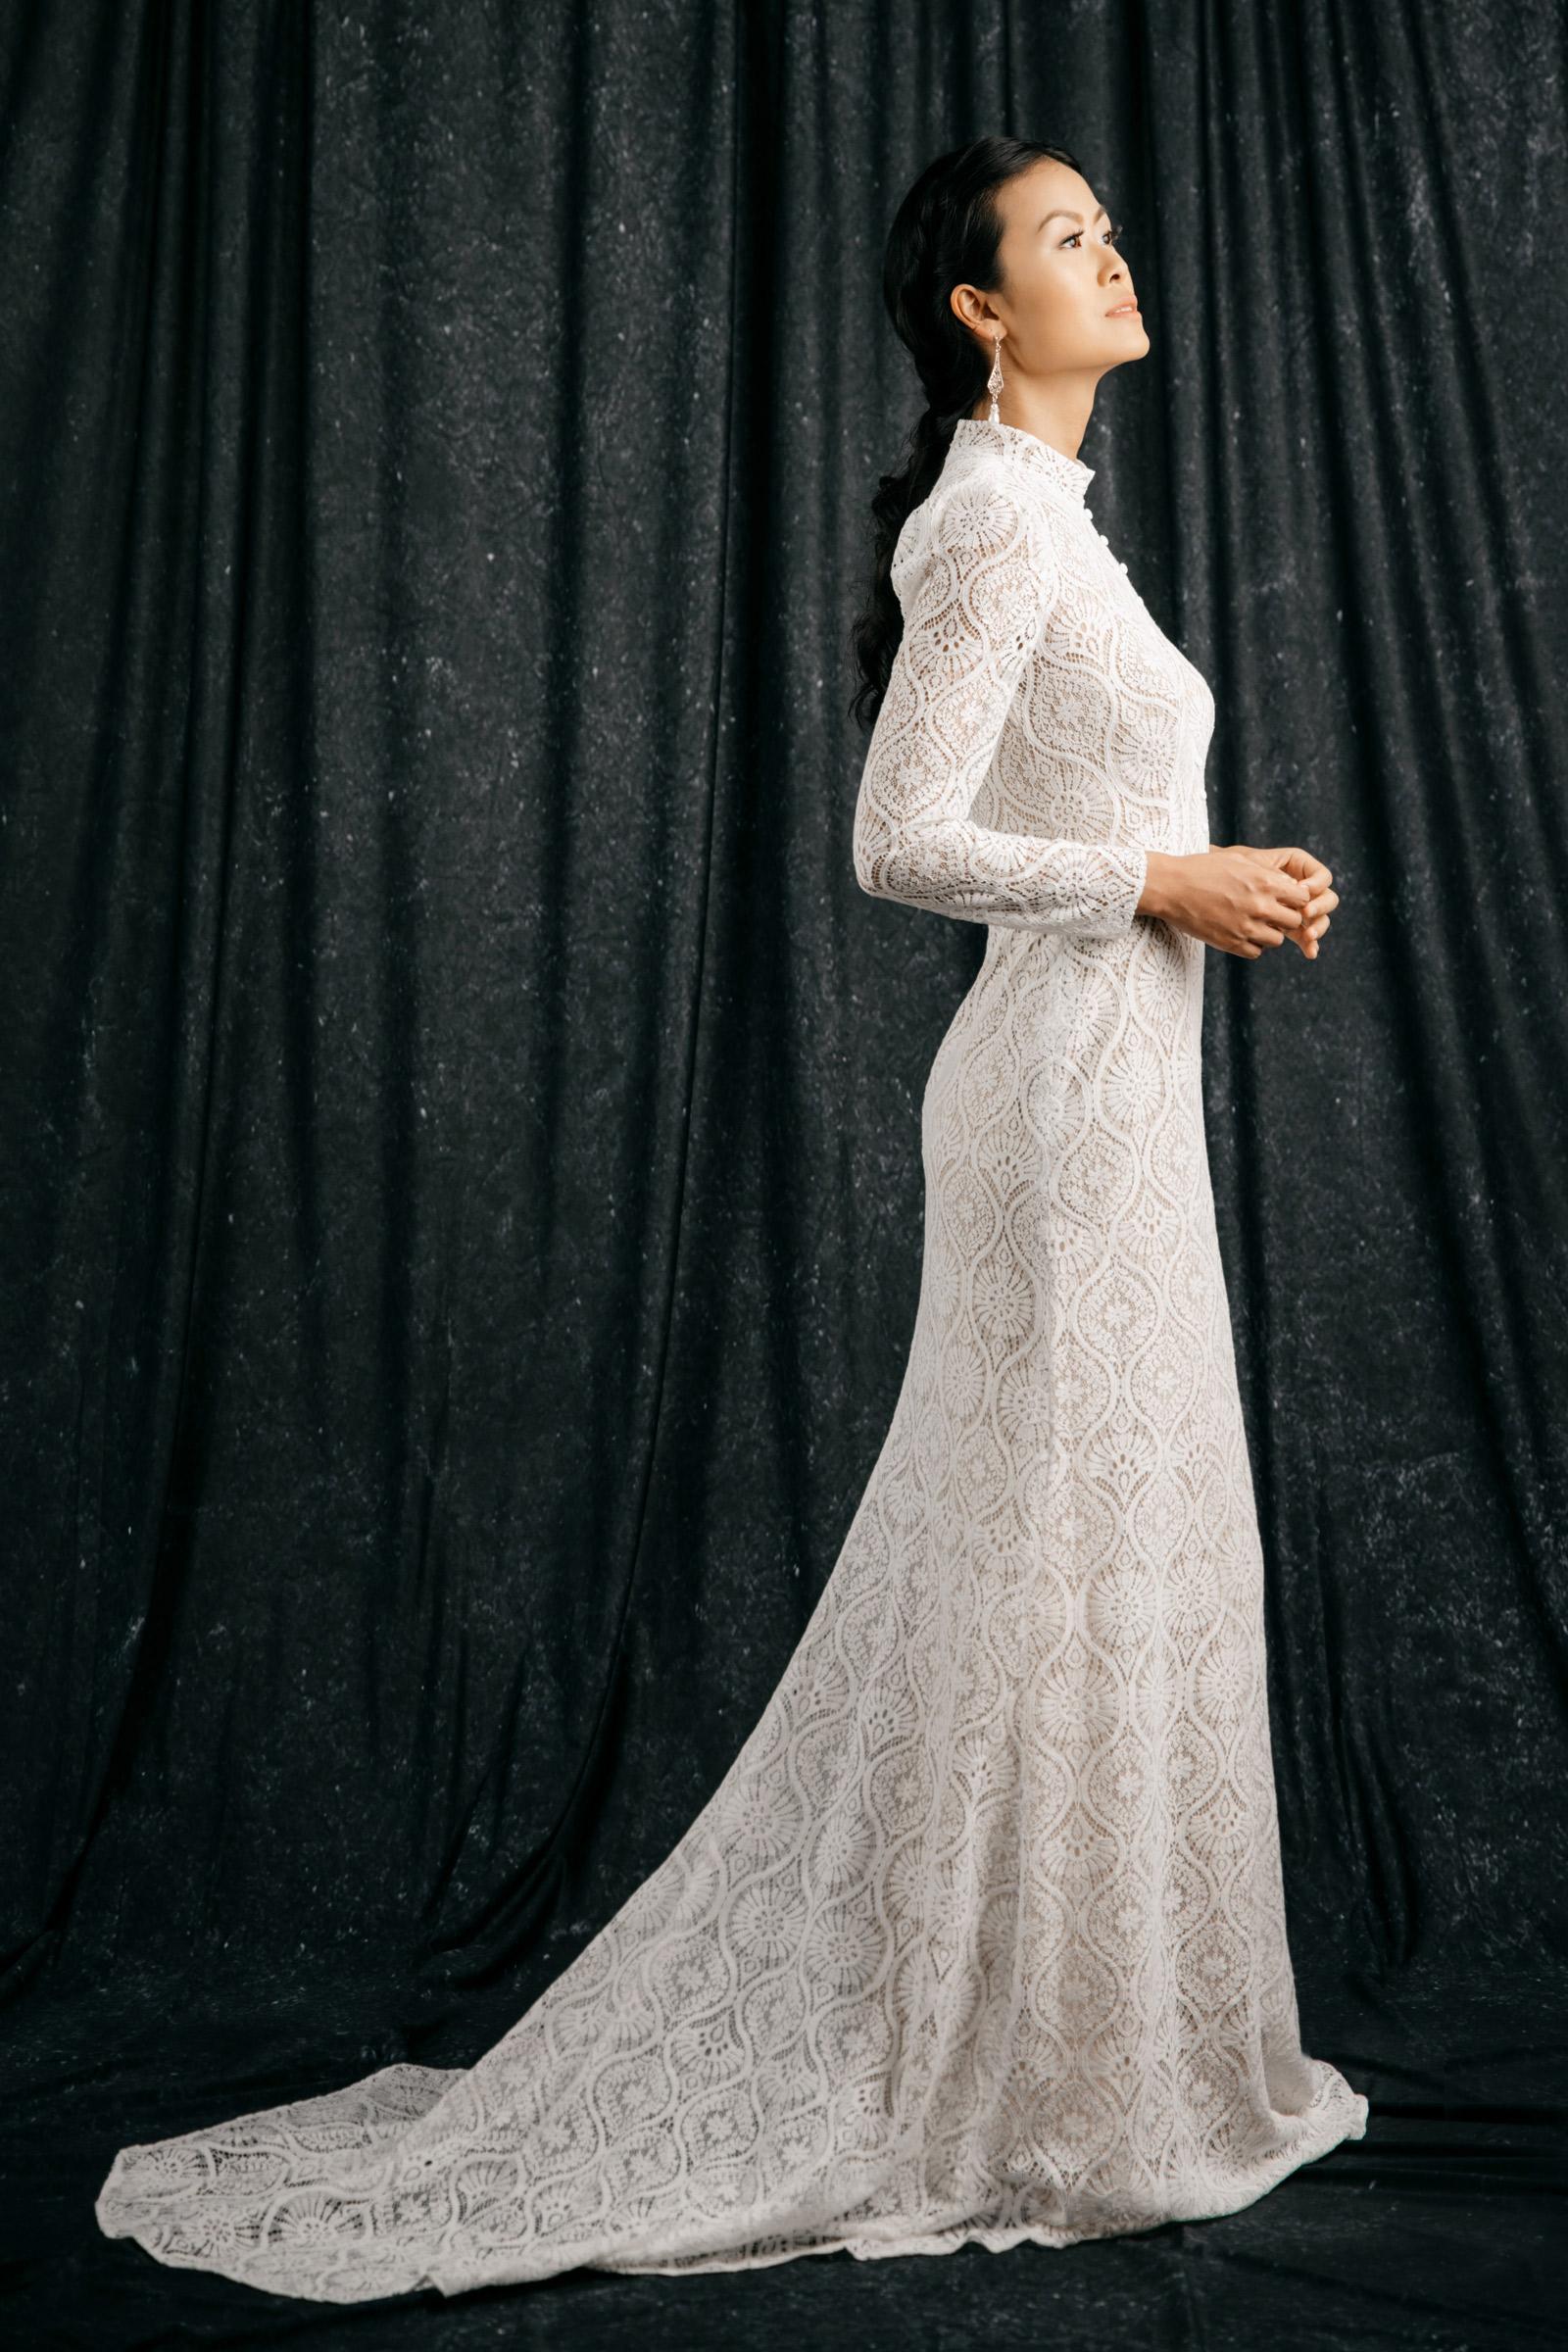 New Wedding Gown Collection Draws Inspiration From Famous Women Of Science